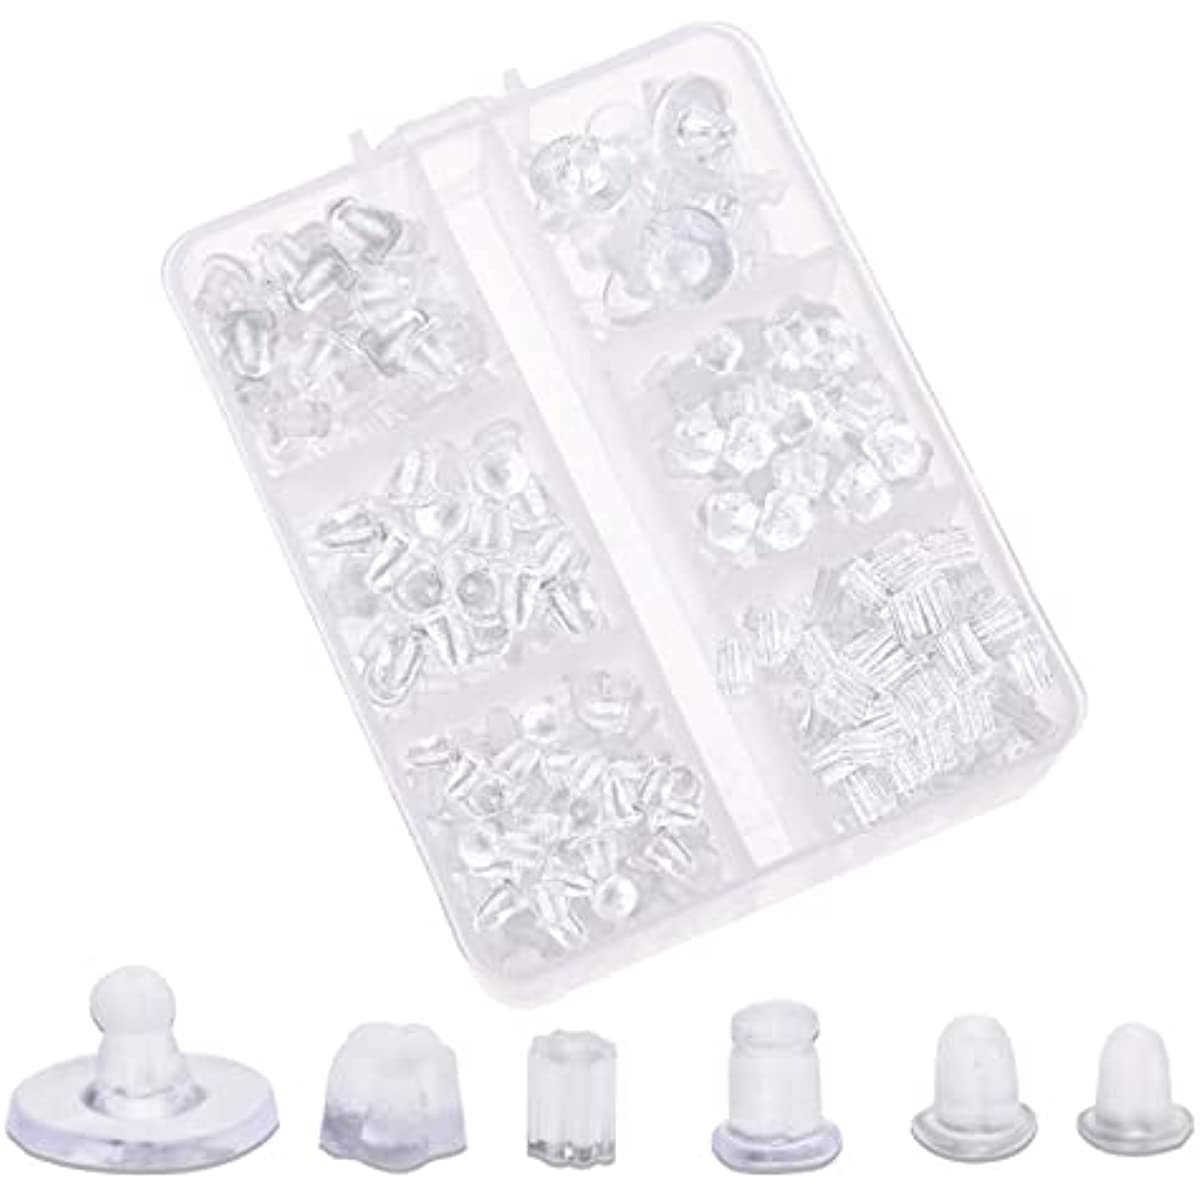 4 Styles 620pcs Earring Backs Set, Including Silicone, Transparent Plastic,  Rubber Earring Backs, Bullet Clutch Earring Backs, Replacement Pieces,  Suitable For Fish Hook Earrings, Ear Studs, Hoop Earrings, Etc.